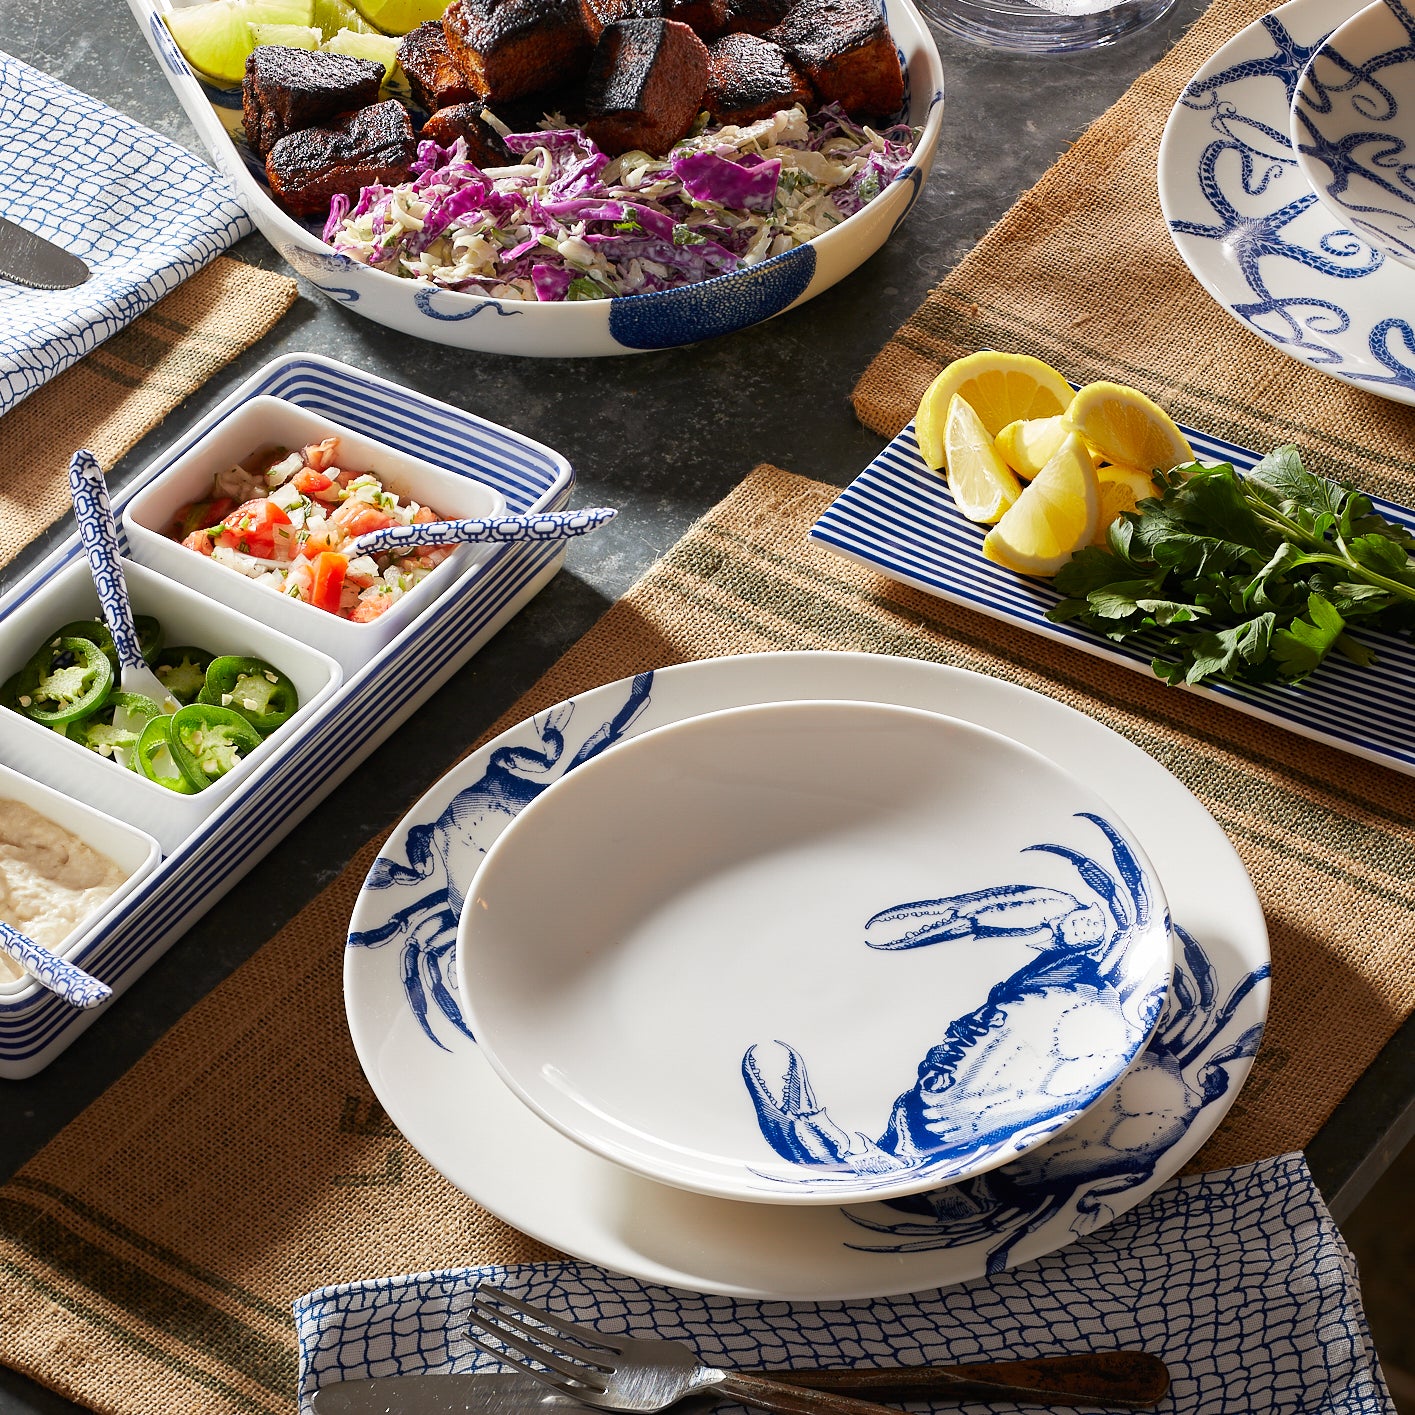 A Crab Coupe Salad Plate by Caskata Artisanal Home, made of premium porcelain, features a detailed blue crab pattern at the bottom.